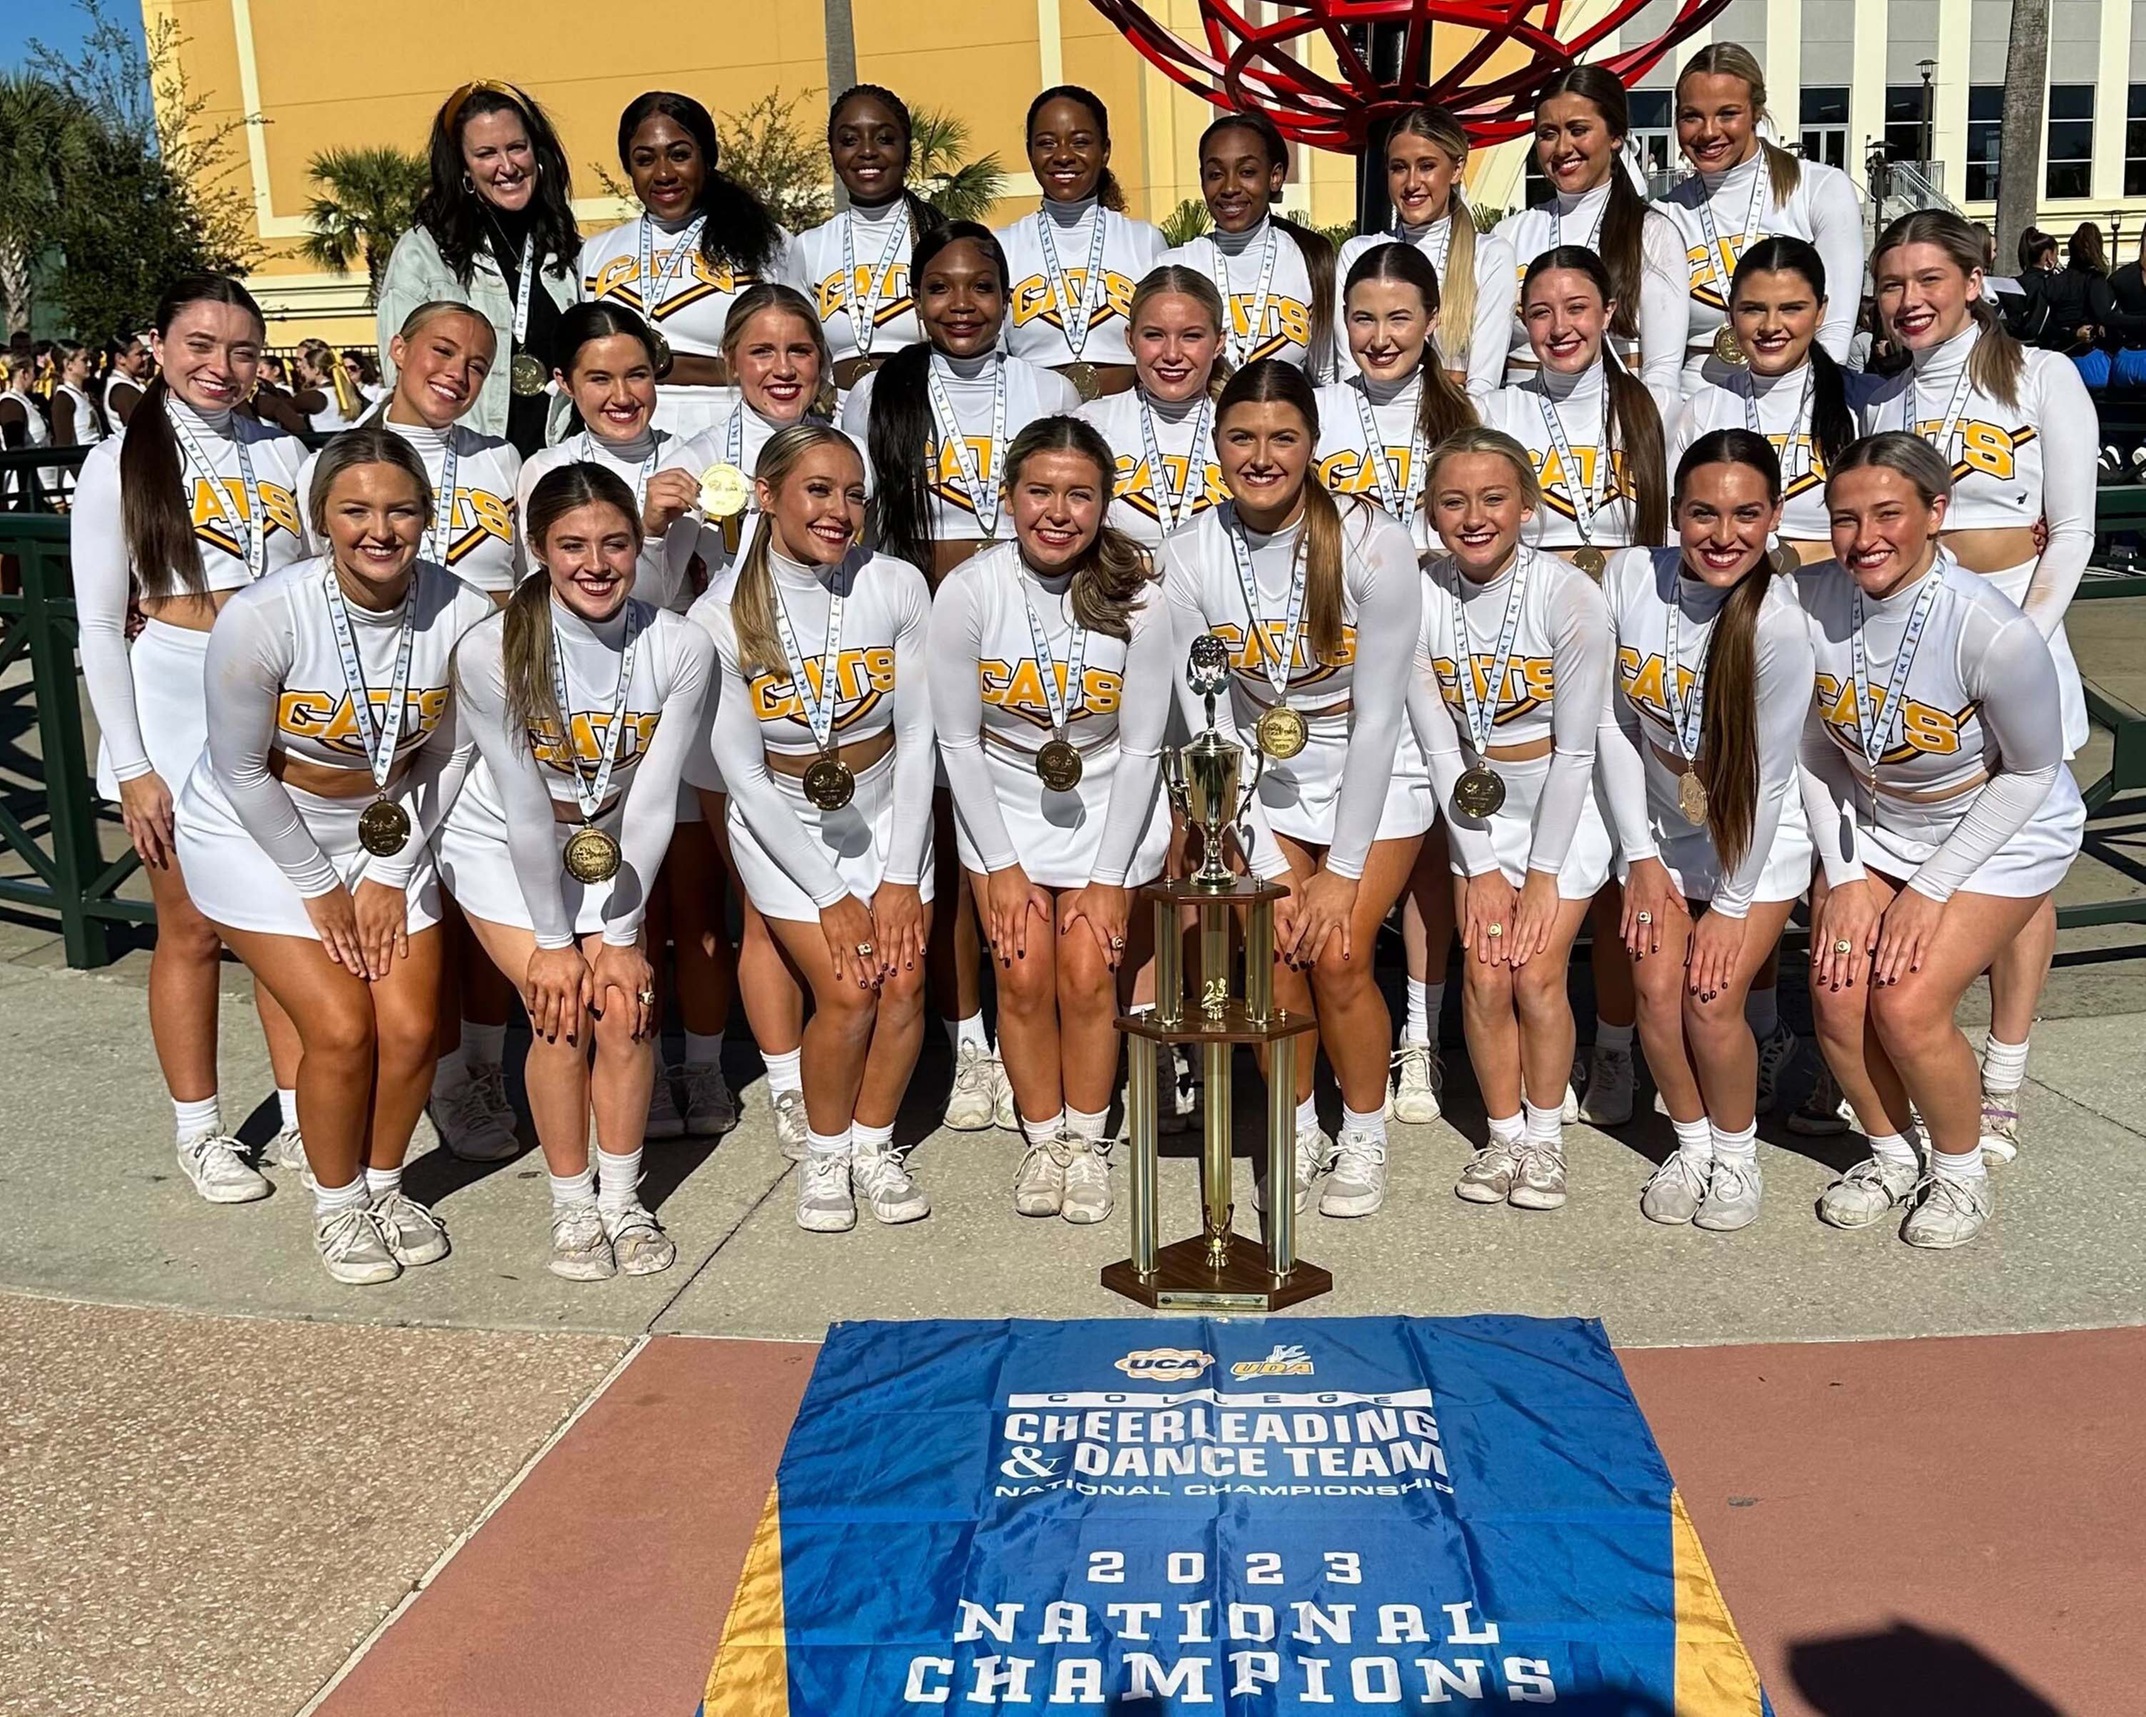 2-time National Champion PRCC cheer to host future and past Wildcat cheerleaders